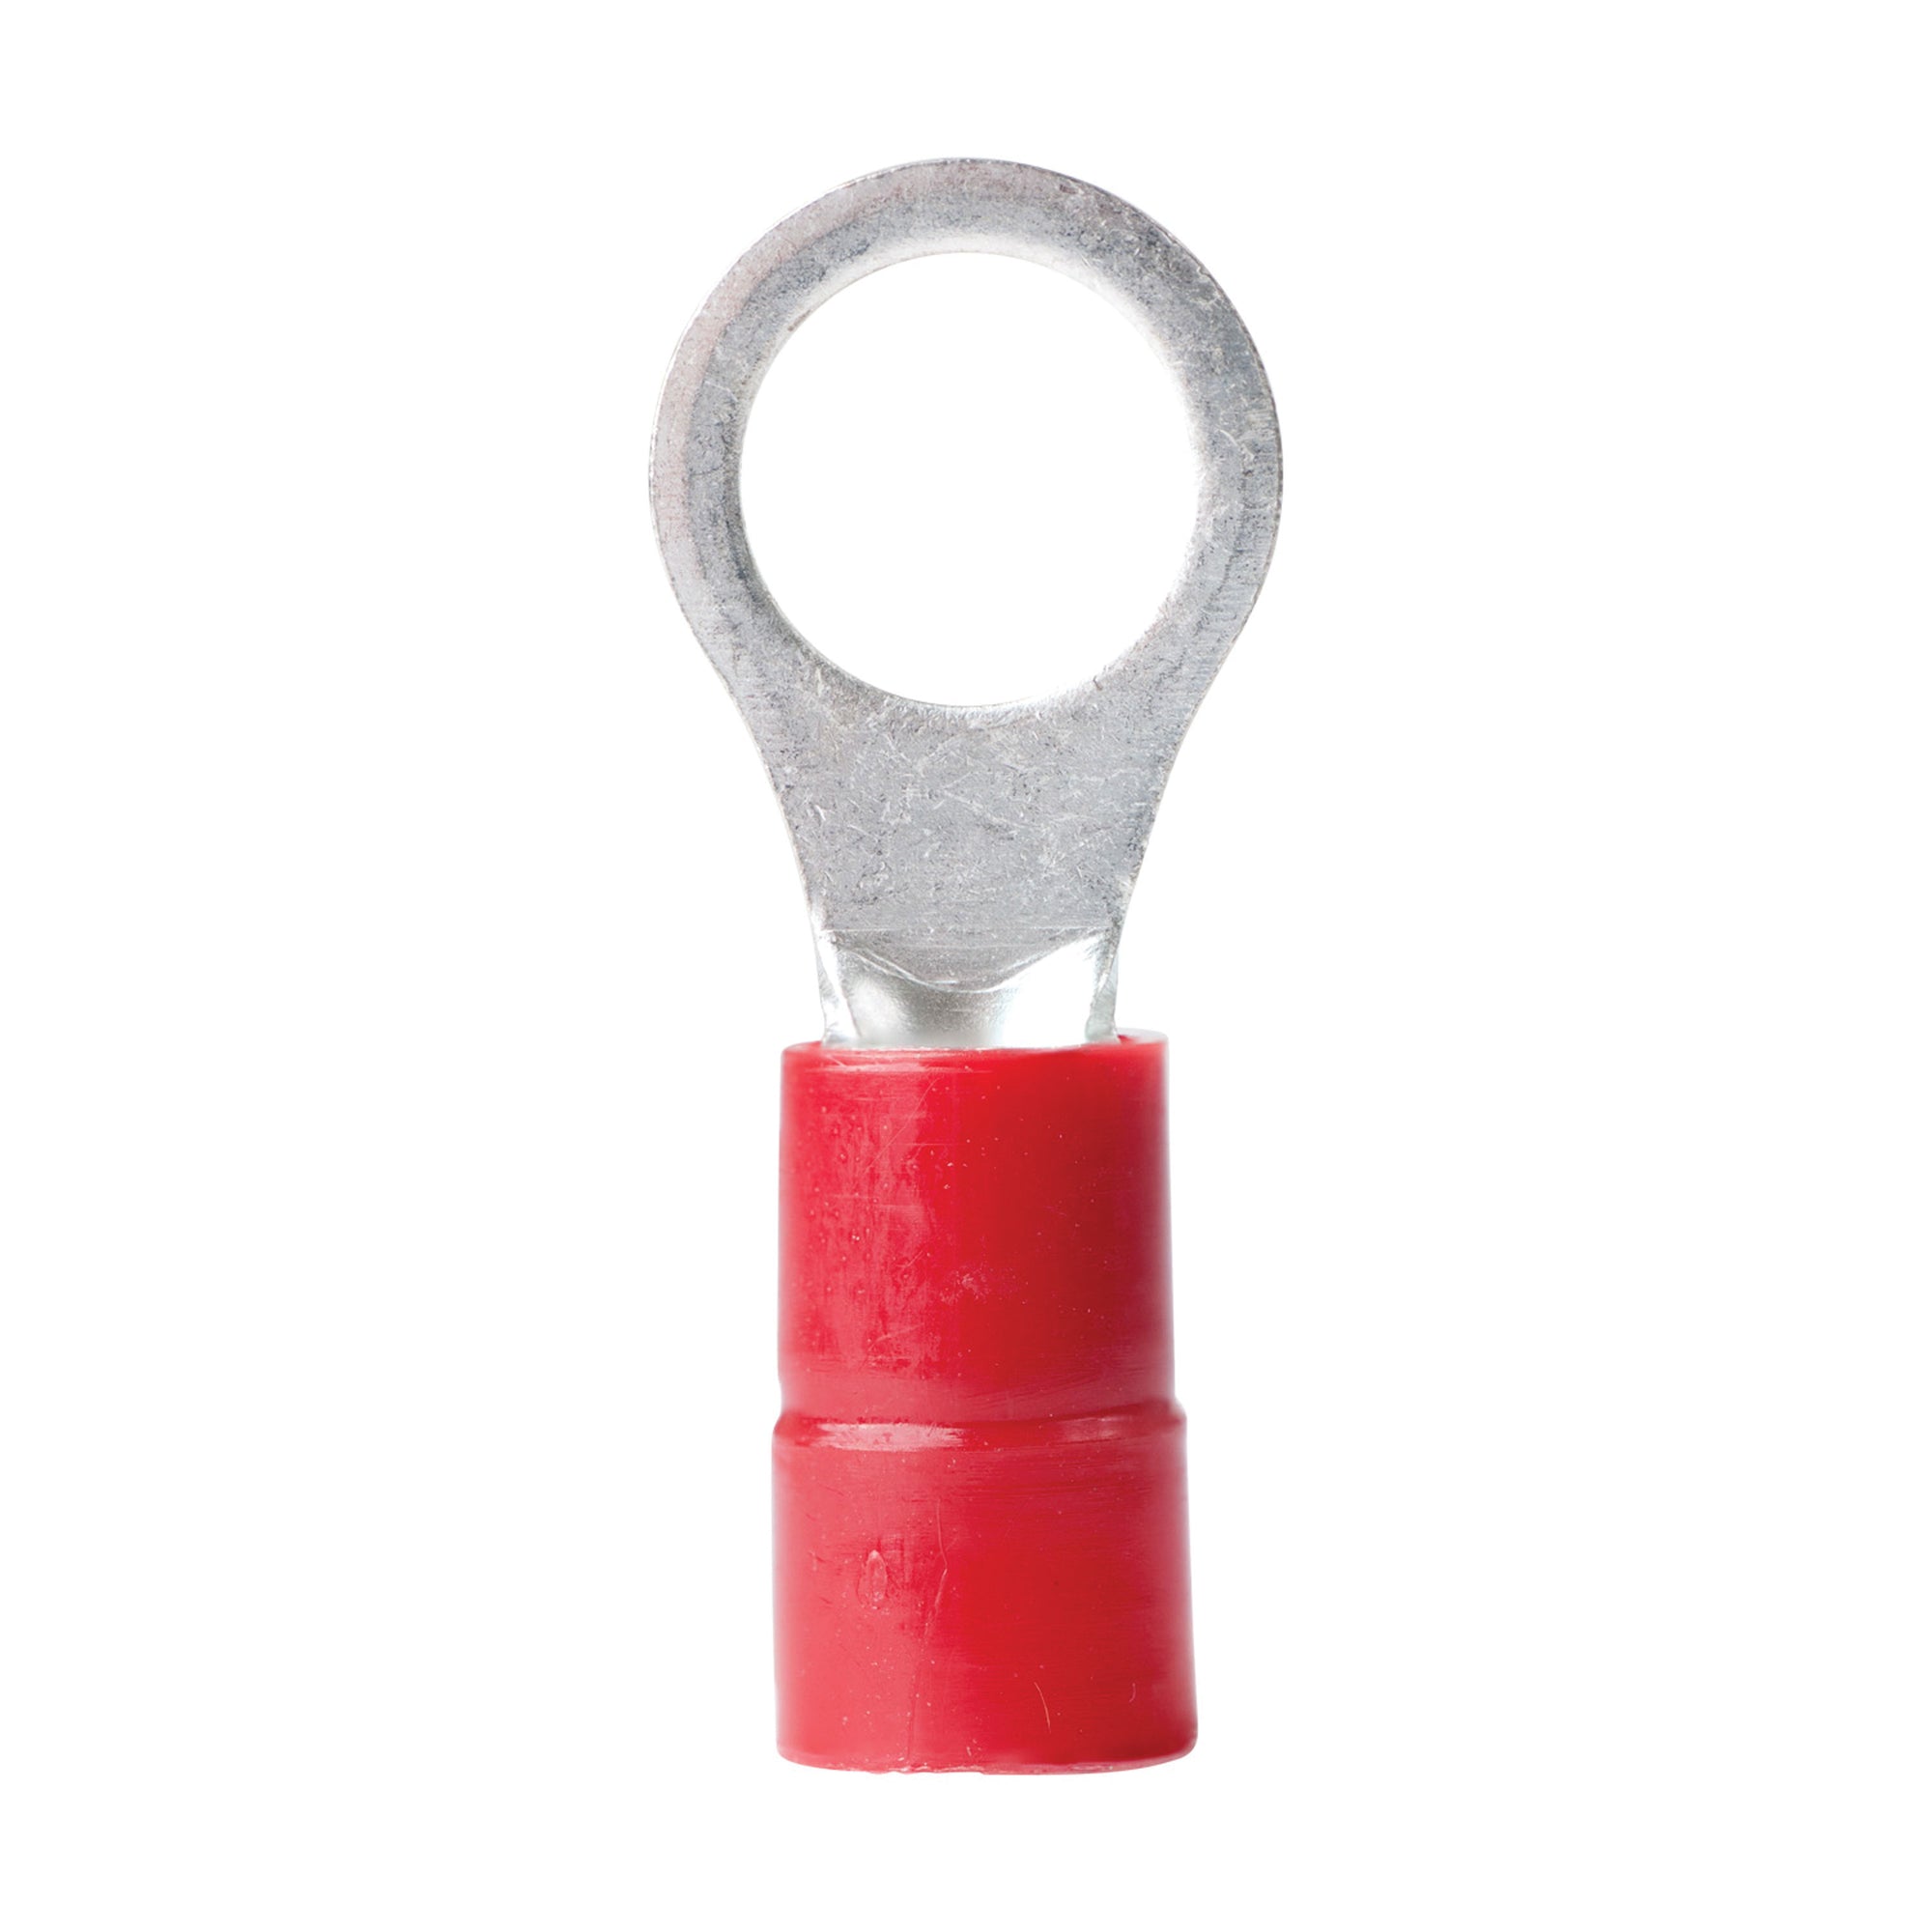 Ancor 230236 Nylon Ring Terminal - #8, 3/8", Red, Pack of 2